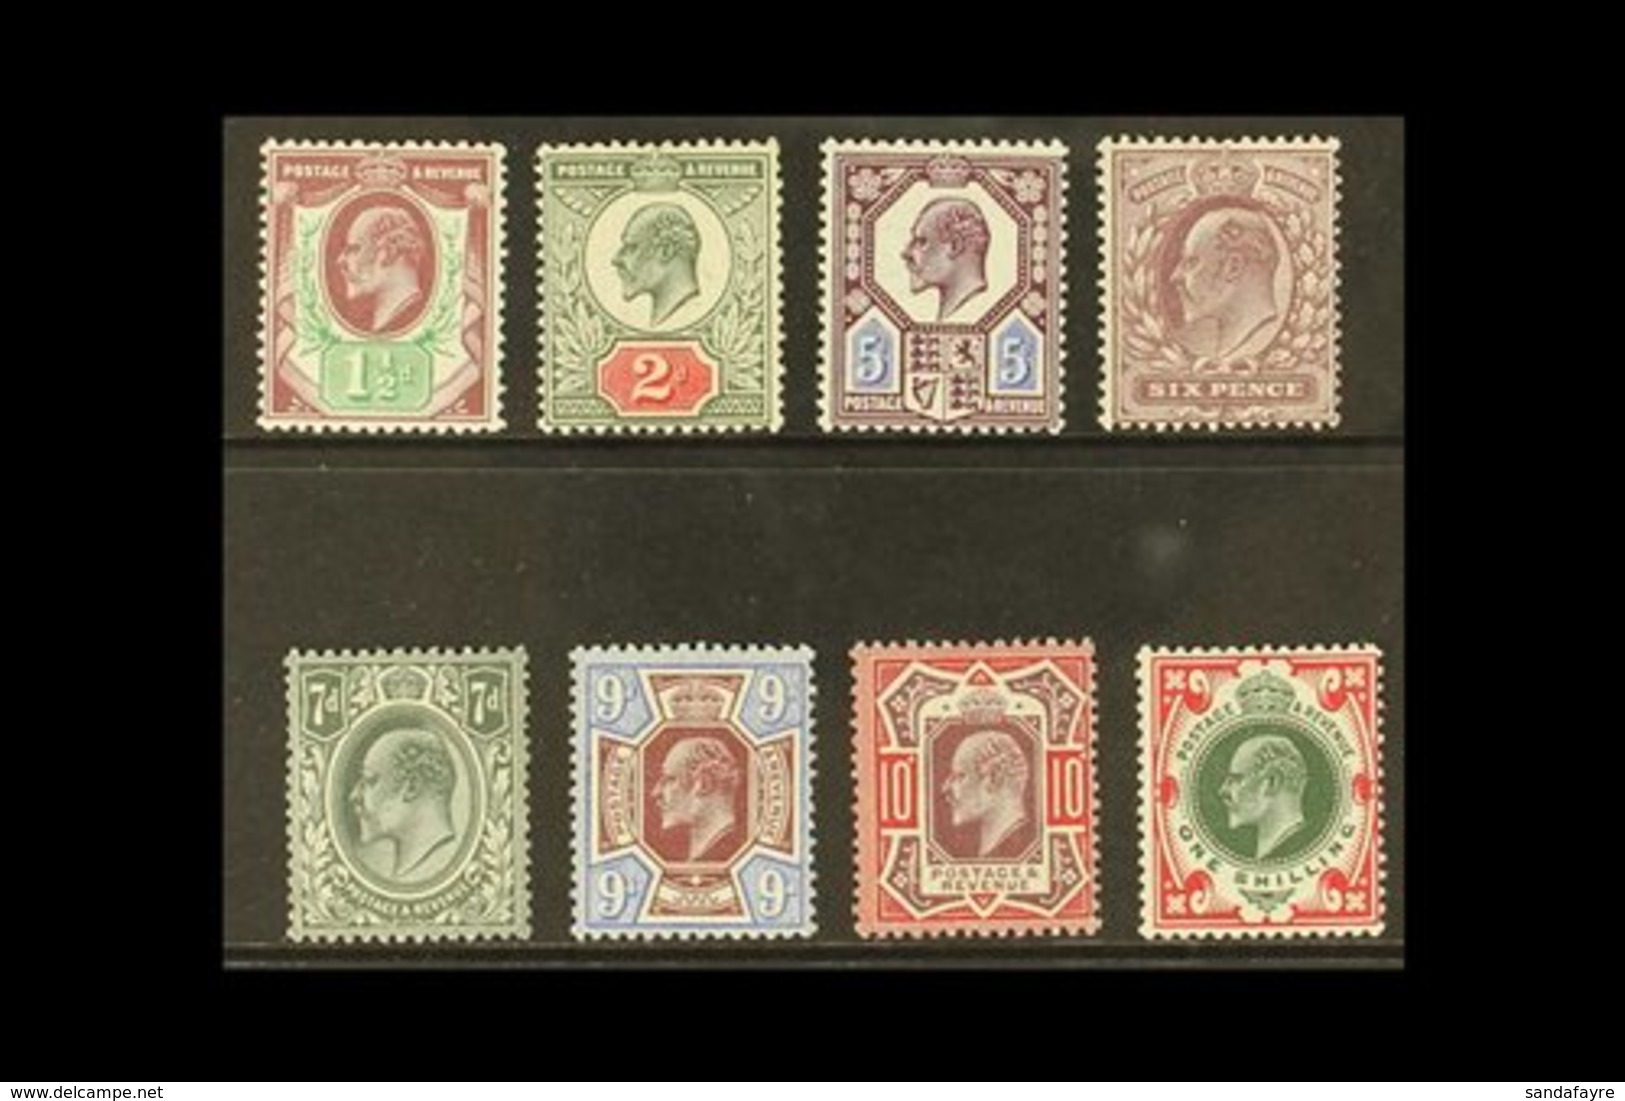 1911-13 Somerset House Prints Basic Set Complete From ½d To 1s, SG 287/314, Never Hinged Mint. (8 Stamps) For More Image - Sin Clasificación